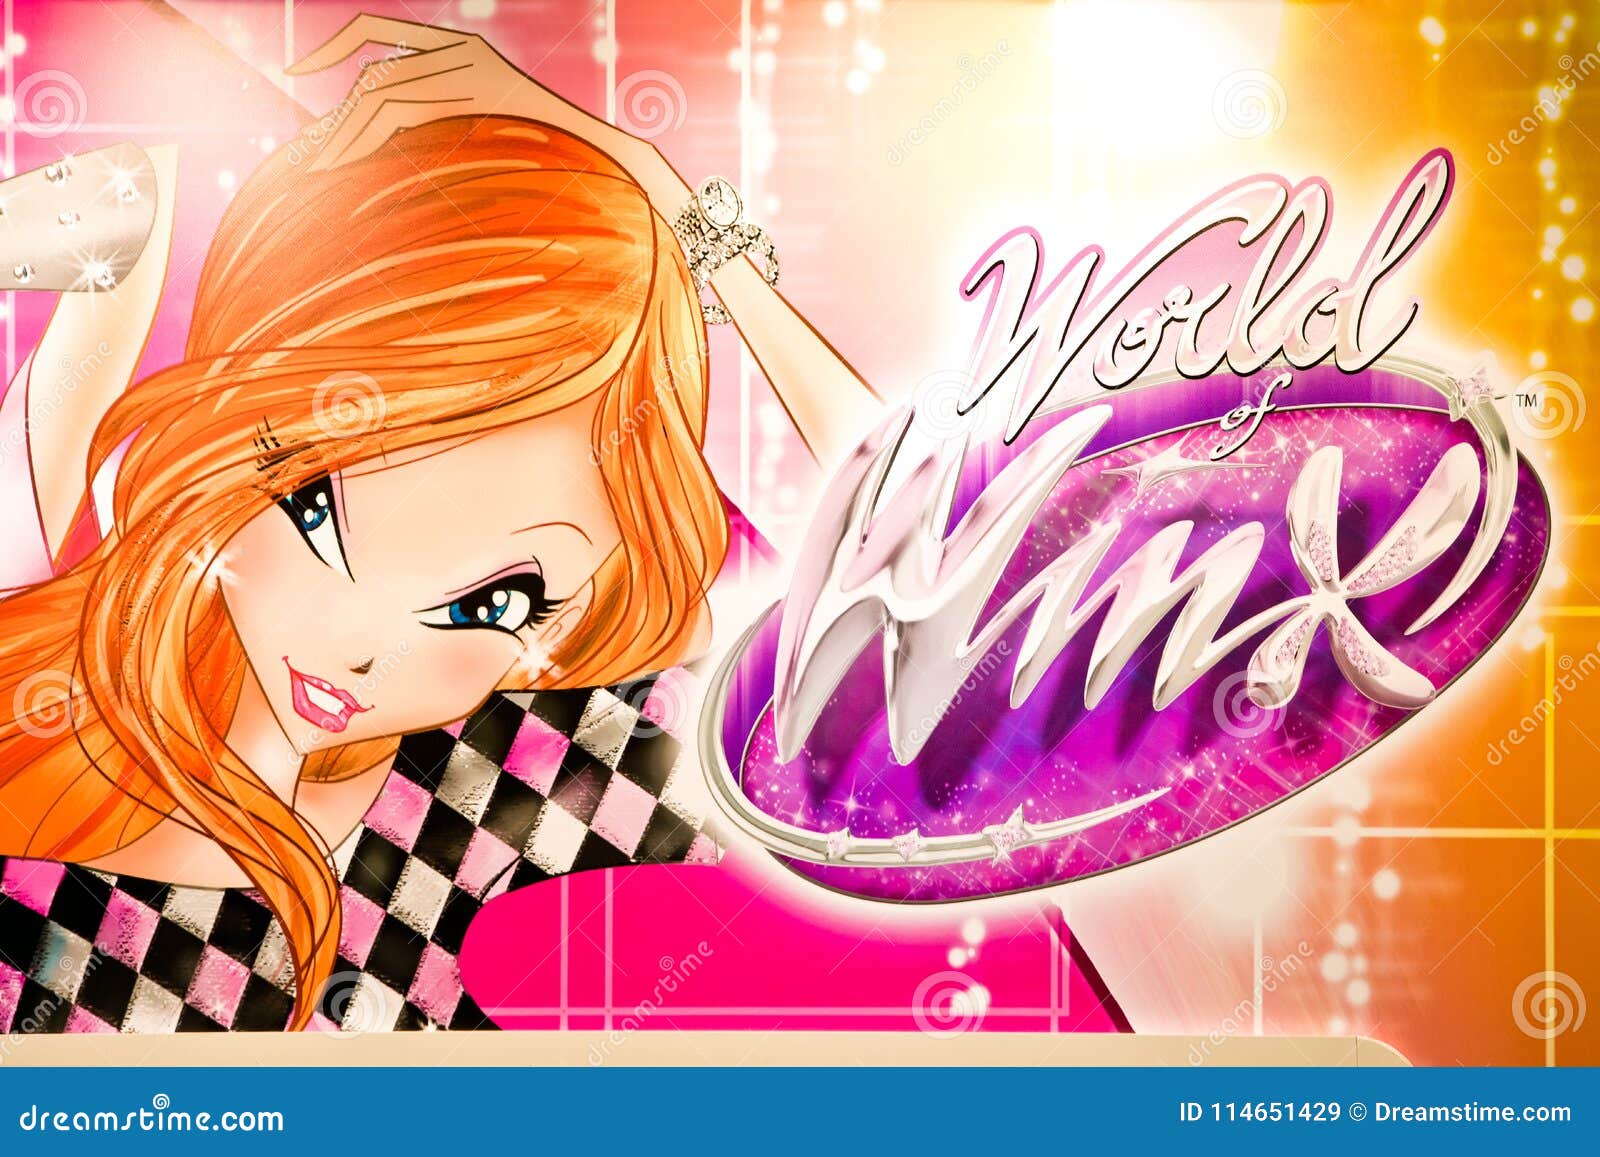 Winx Club Logo Printed on Banner. Winx Club is an Italian Animated  Television Series Editorial Stock Image - Image of entertainment, game:  114651429